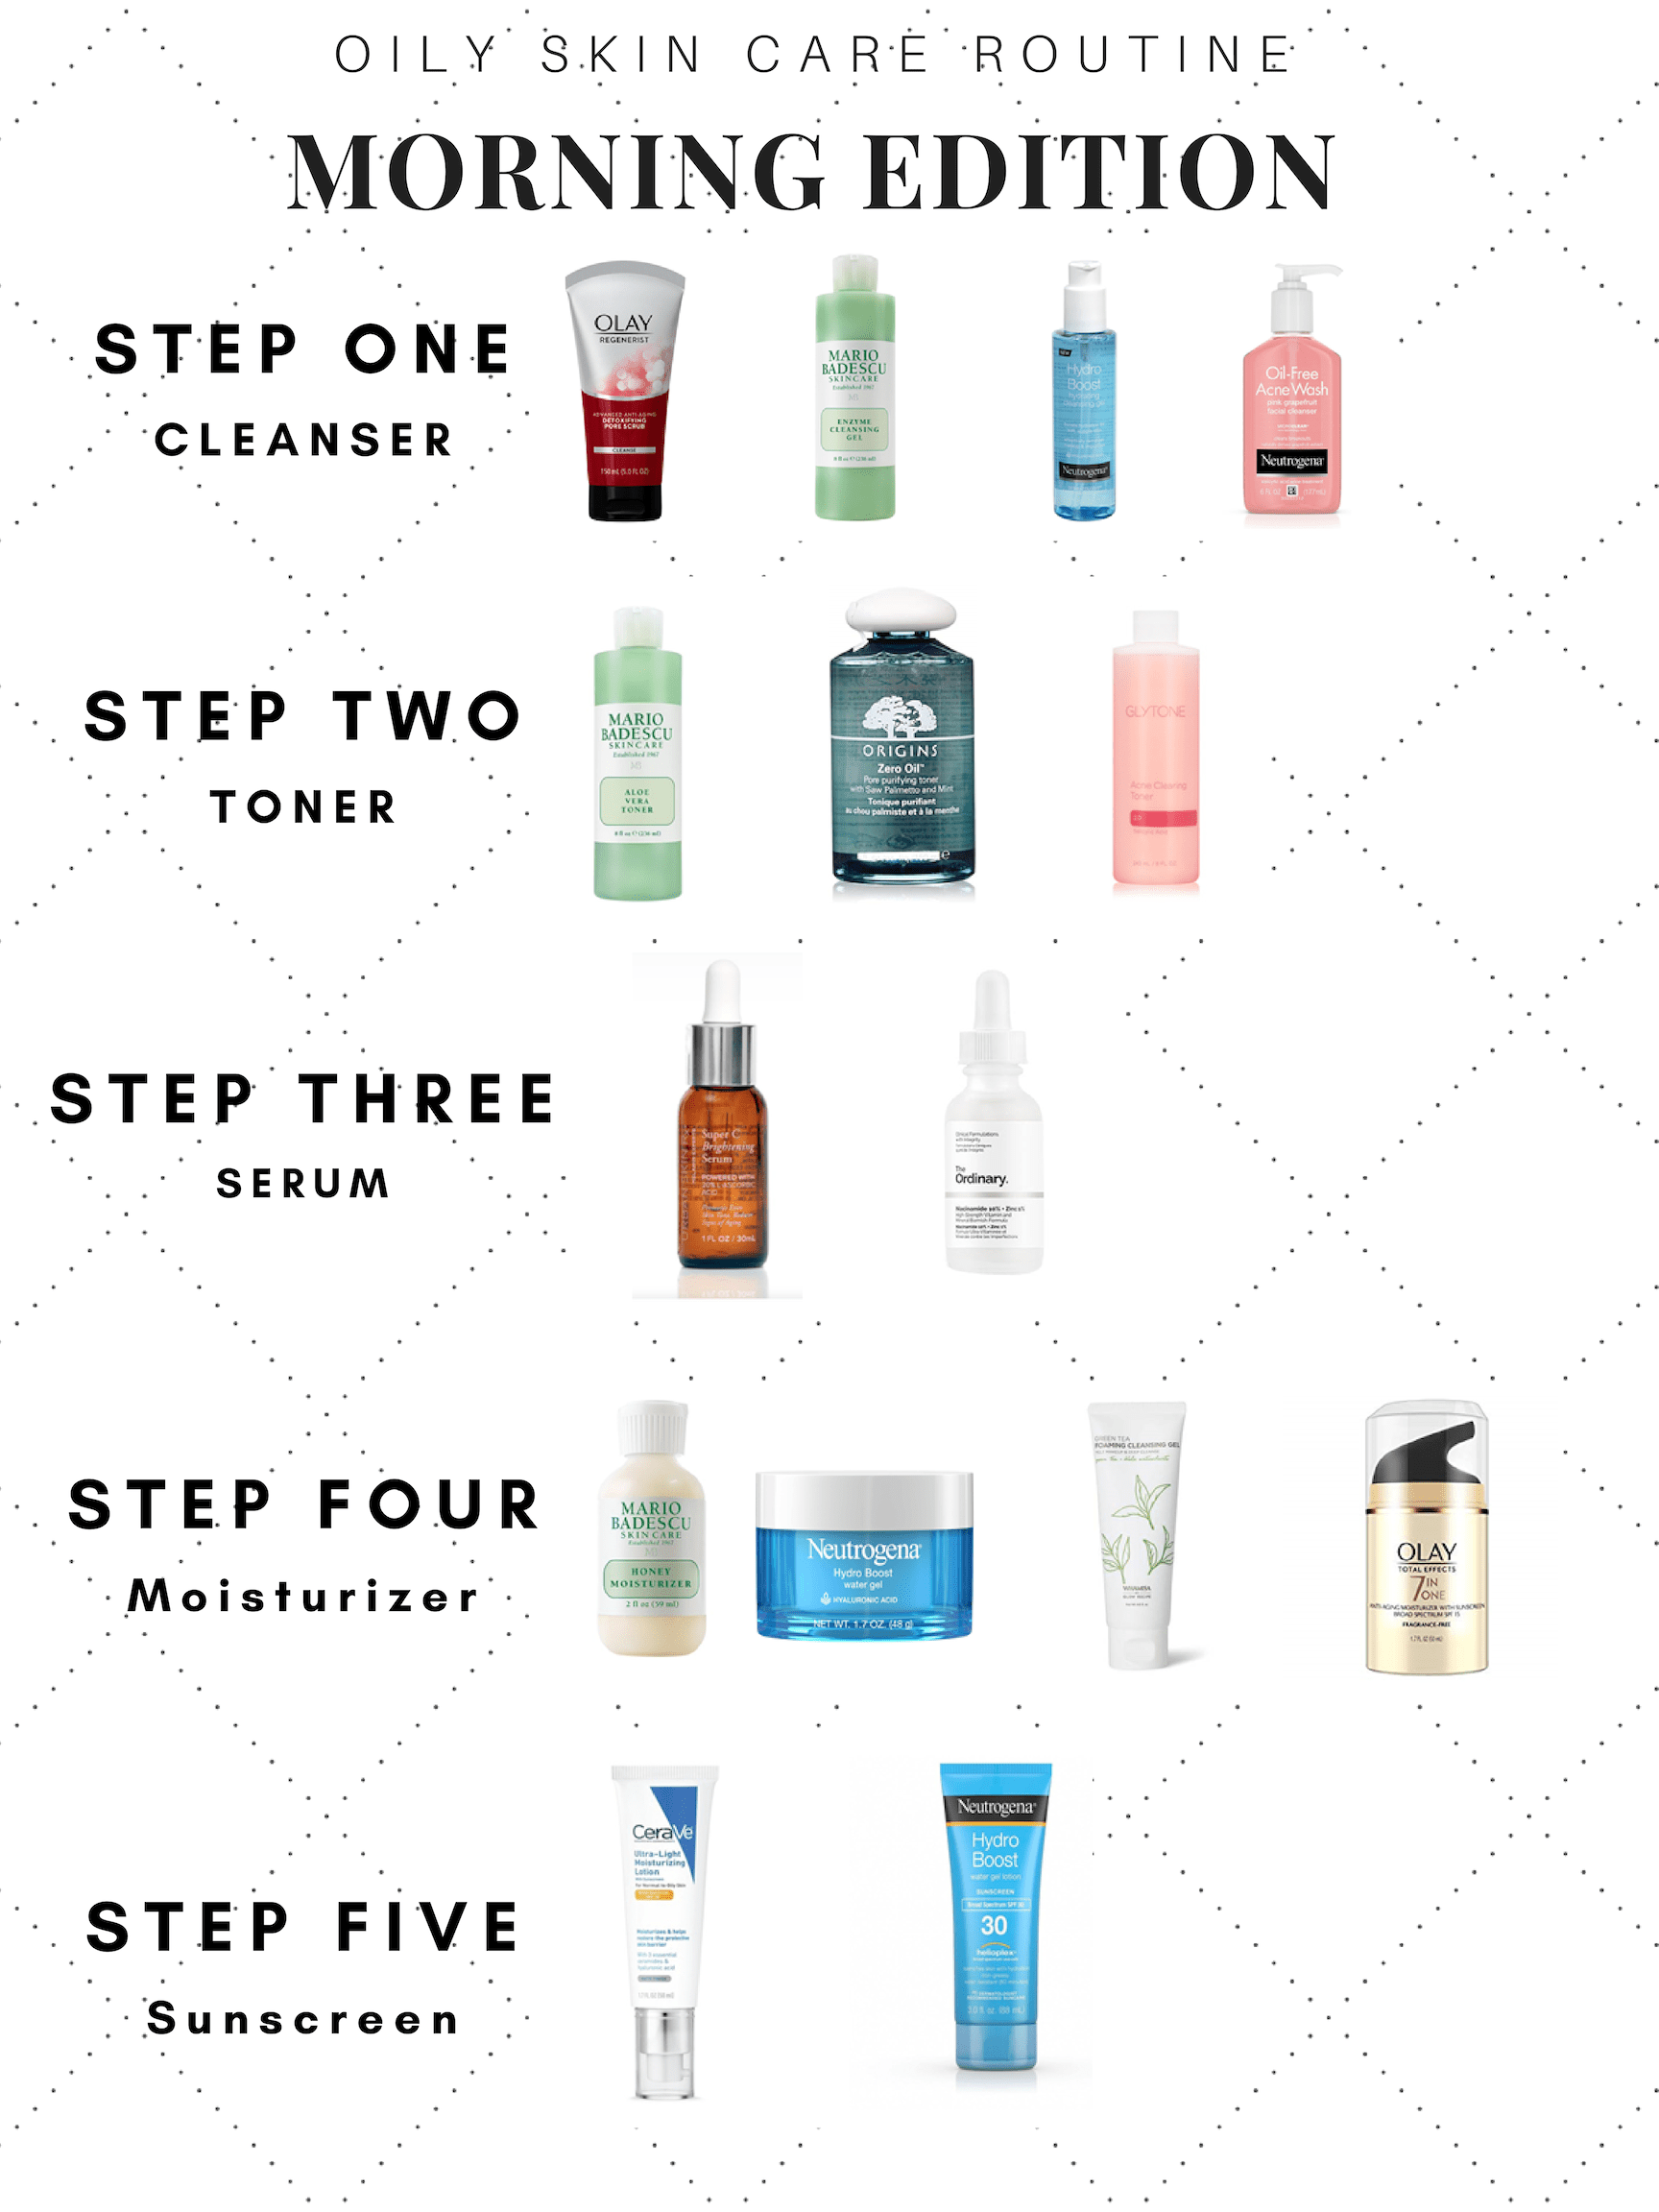 11 skin care Routine for acne ideas